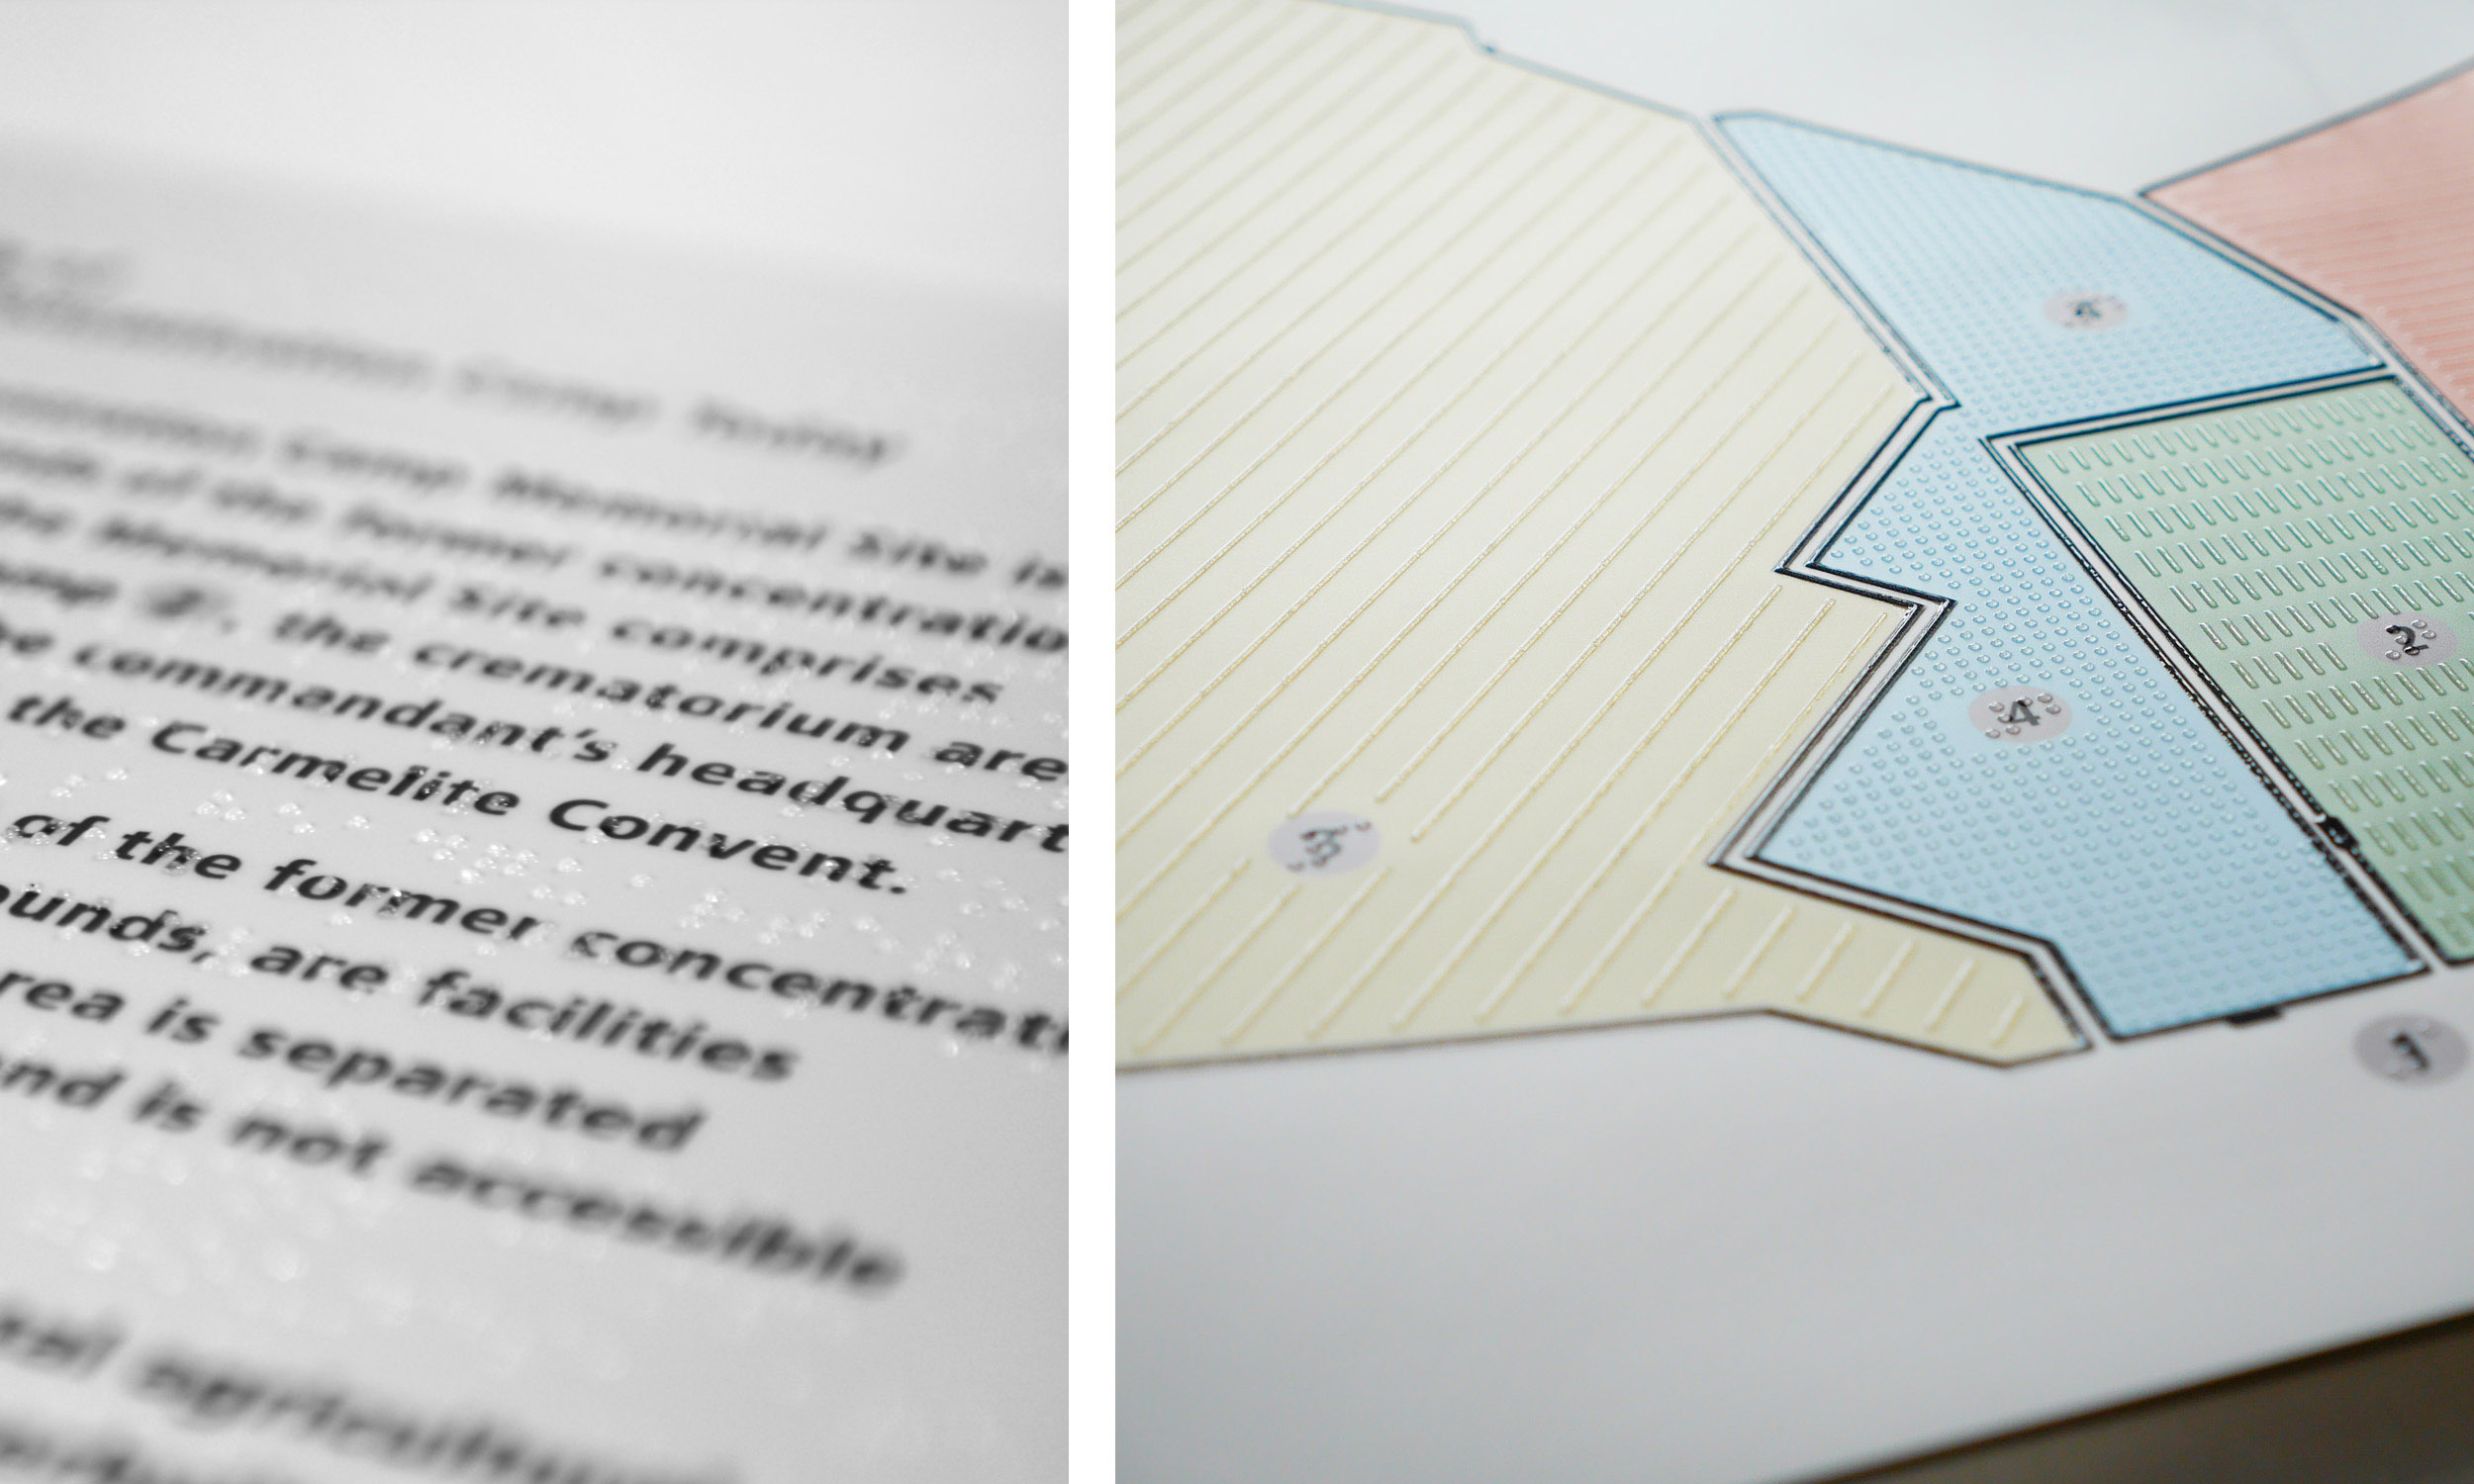 Two detail photos of a tactile map to show text pages with Braille and large print, and a color tactile site plan